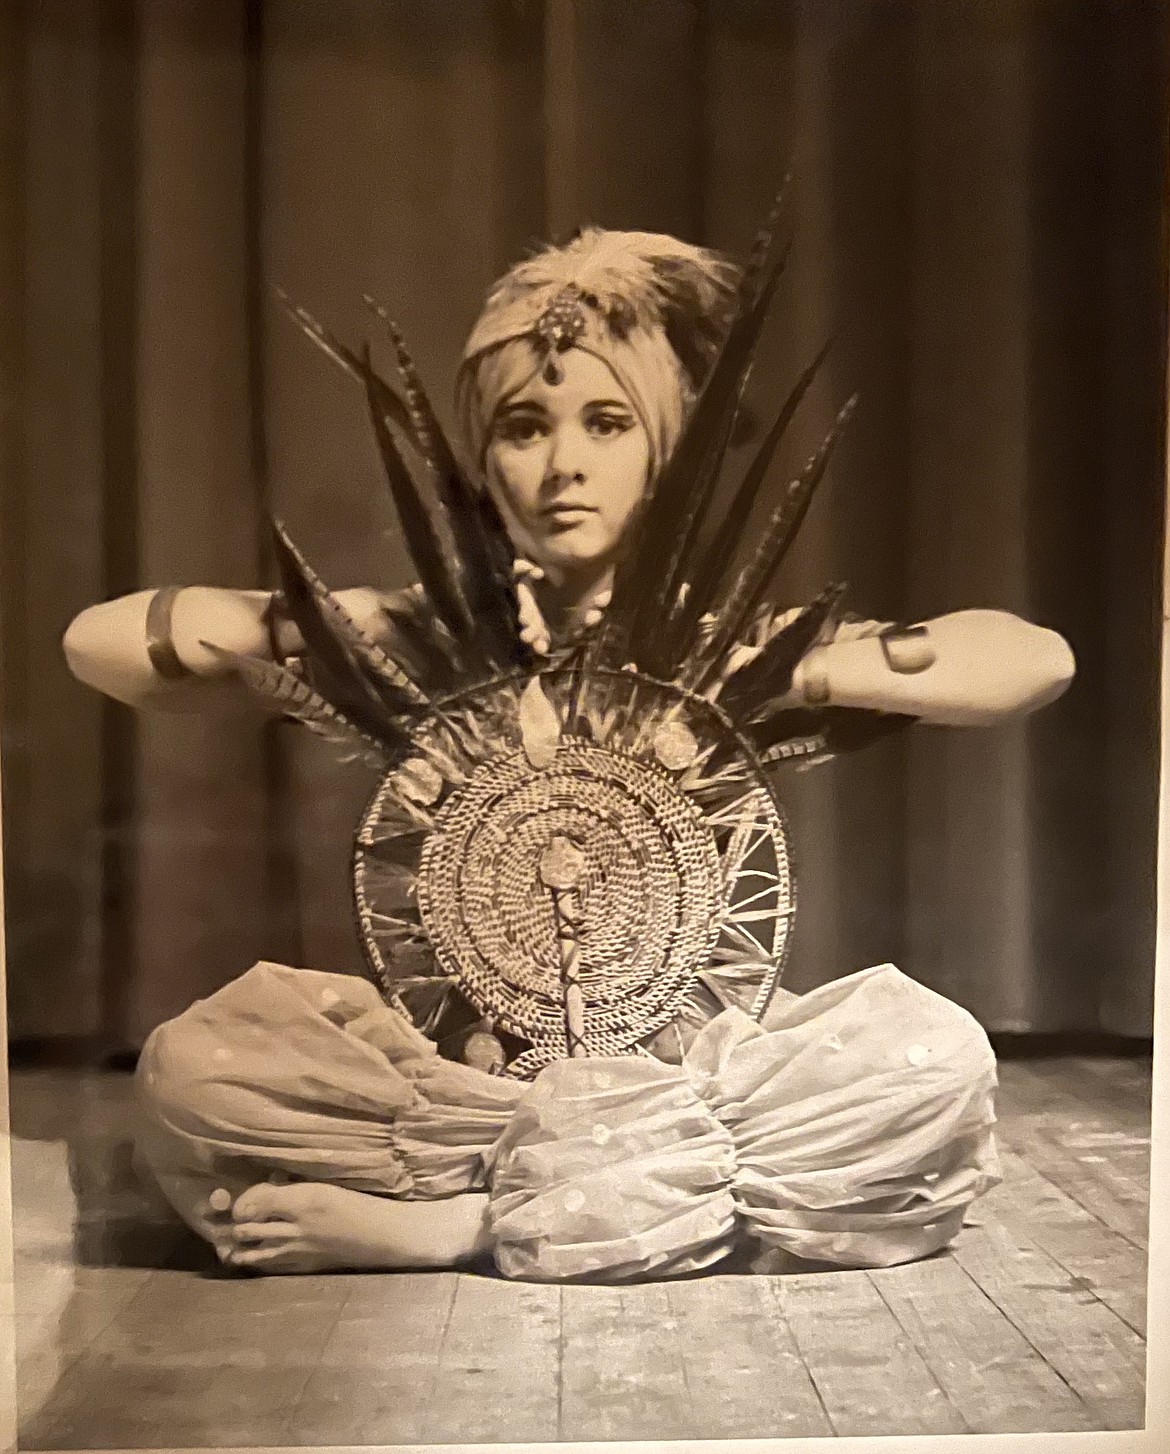 Carol (Brannan) Sullivan performs the role of the Arabian dancer with the Marin Ballet Co. in California - circa 1968-'69. She also performed the Snowflake, Chinese and Main Flower roles.(photo provided)